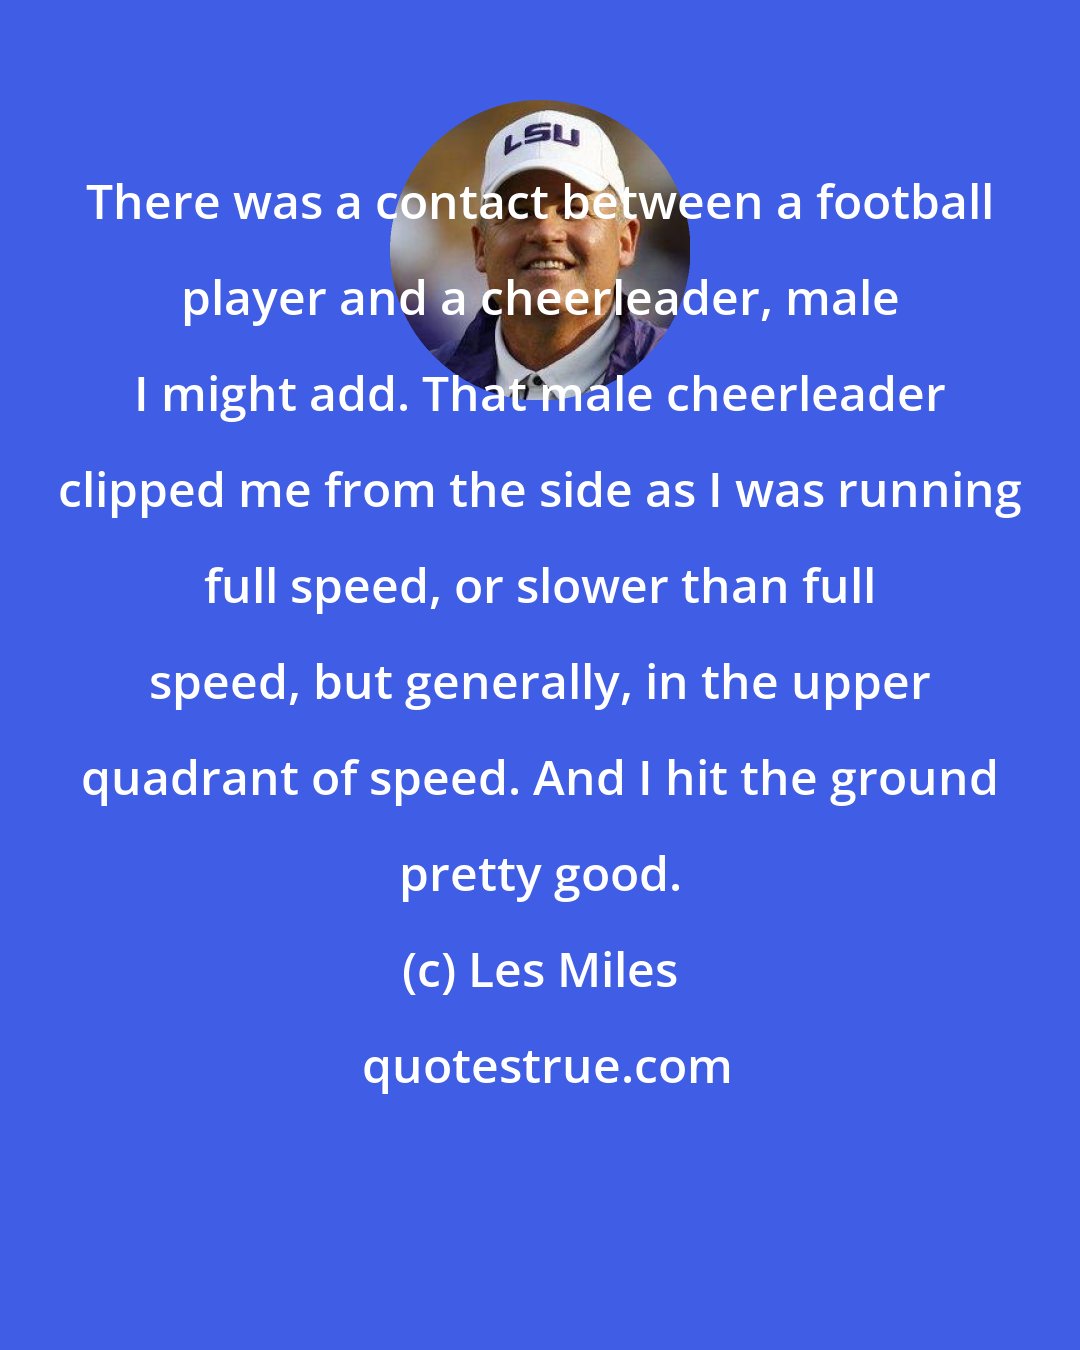 Les Miles: There was a contact between a football player and a cheerleader, male I might add. That male cheerleader clipped me from the side as I was running full speed, or slower than full speed, but generally, in the upper quadrant of speed. And I hit the ground pretty good.